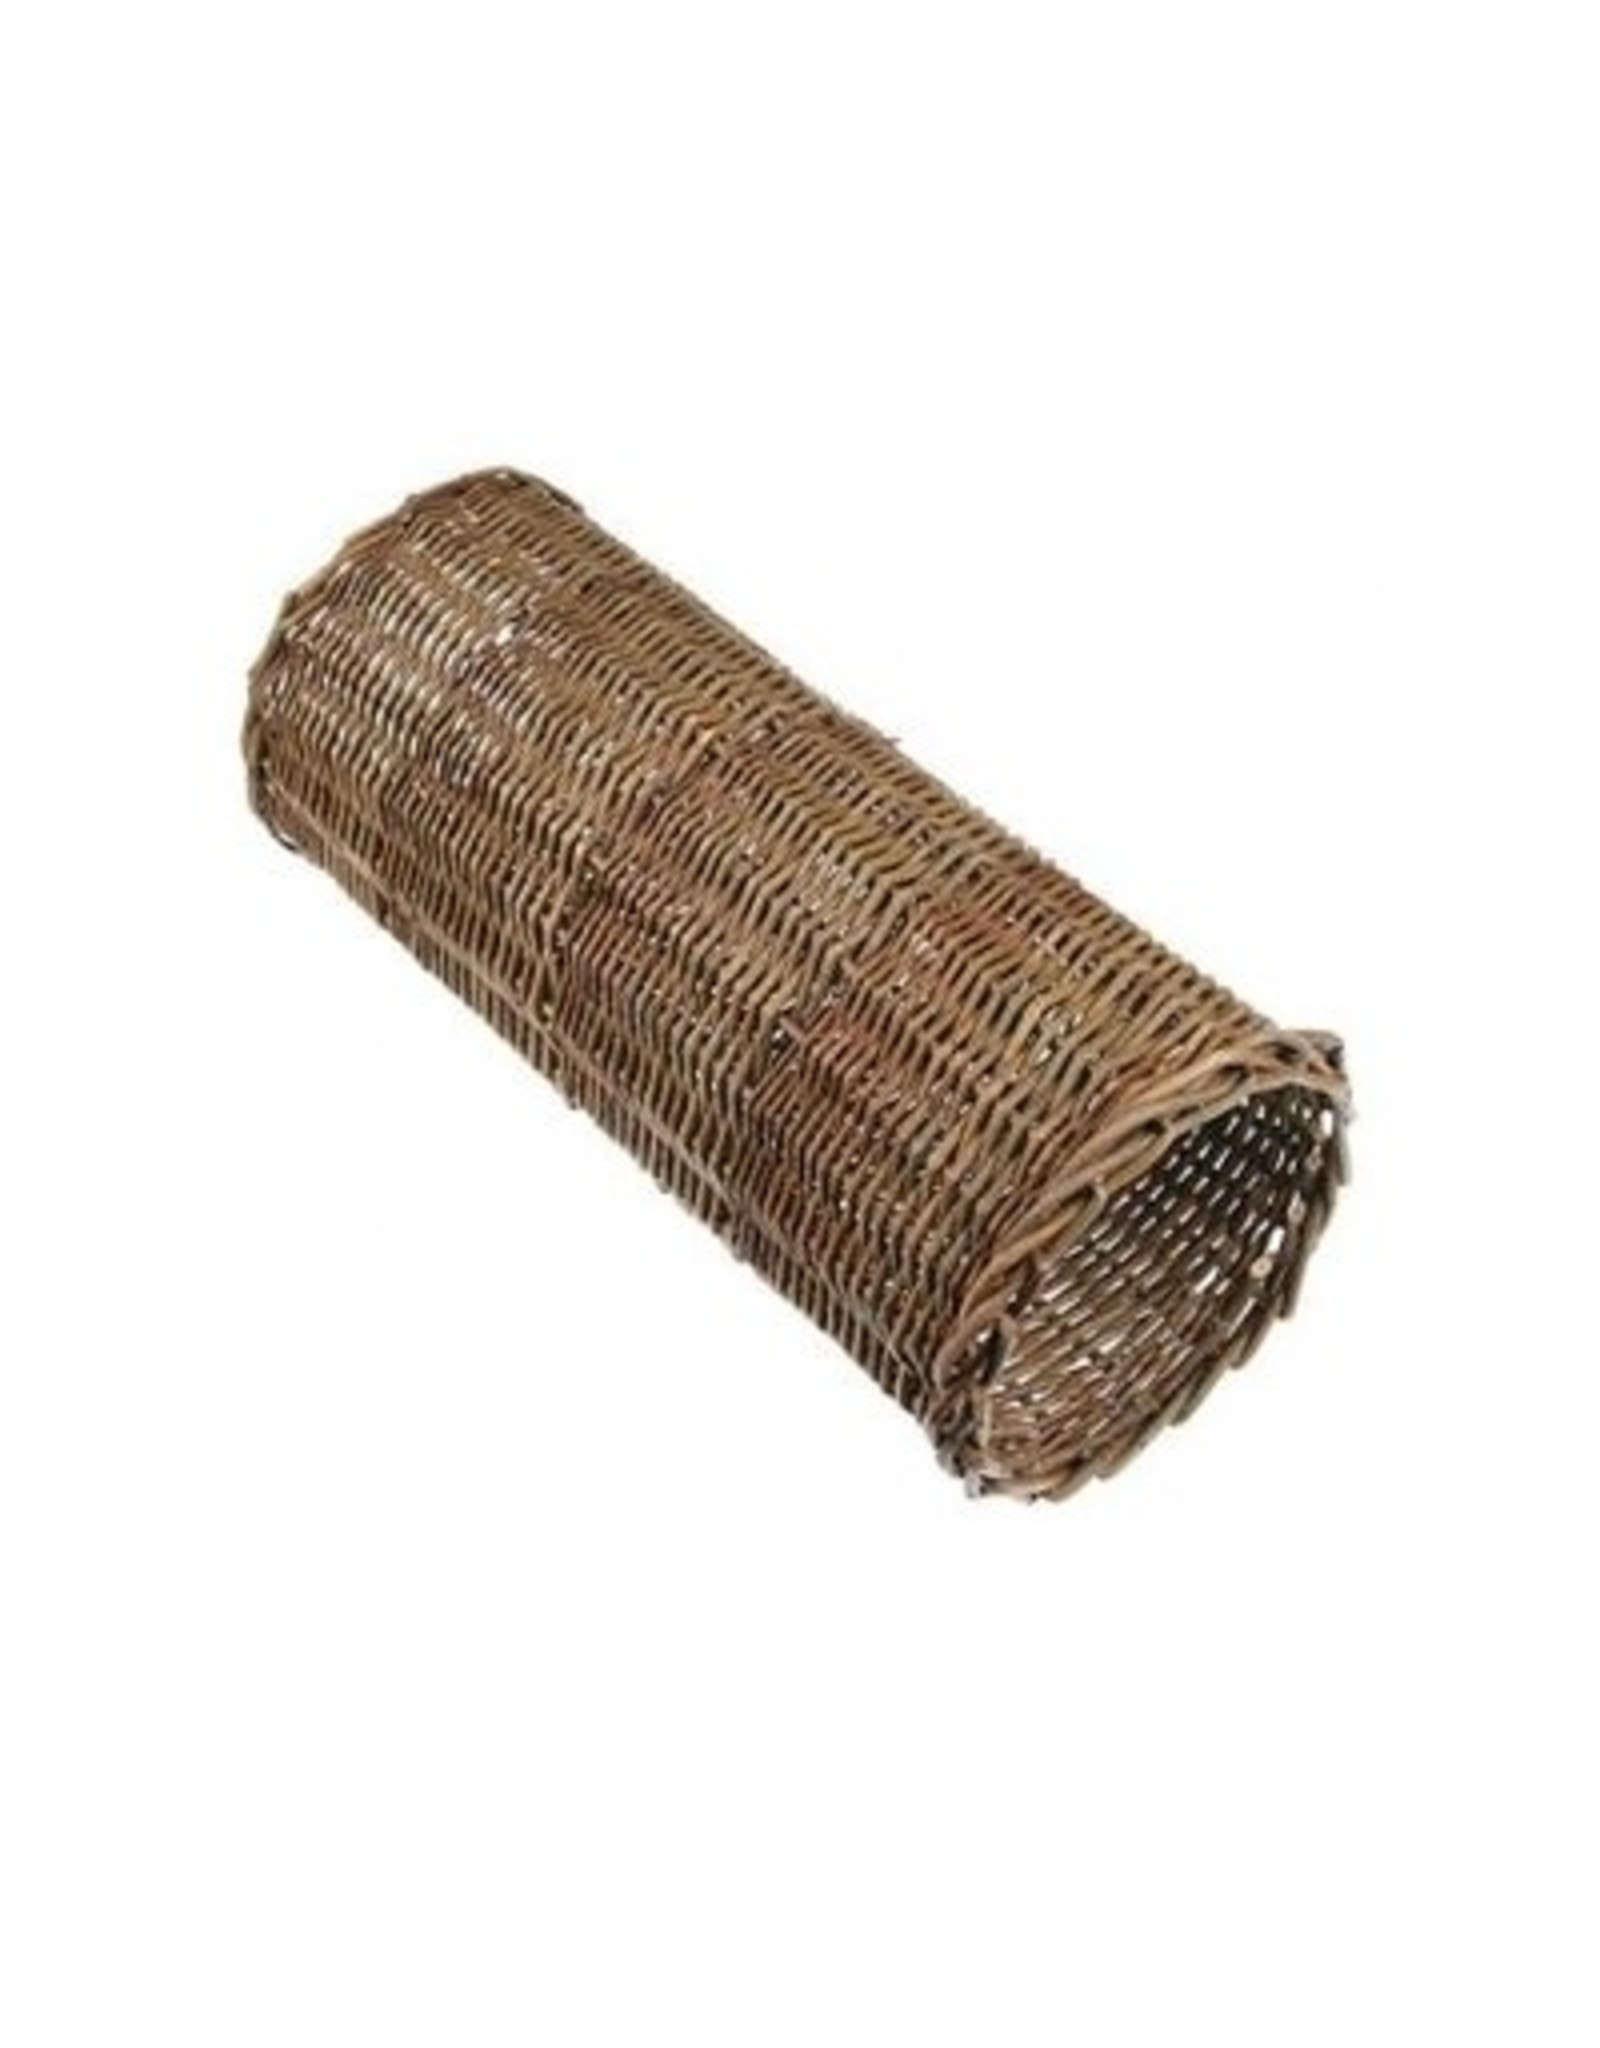 Happy Pet Willow Tube Large